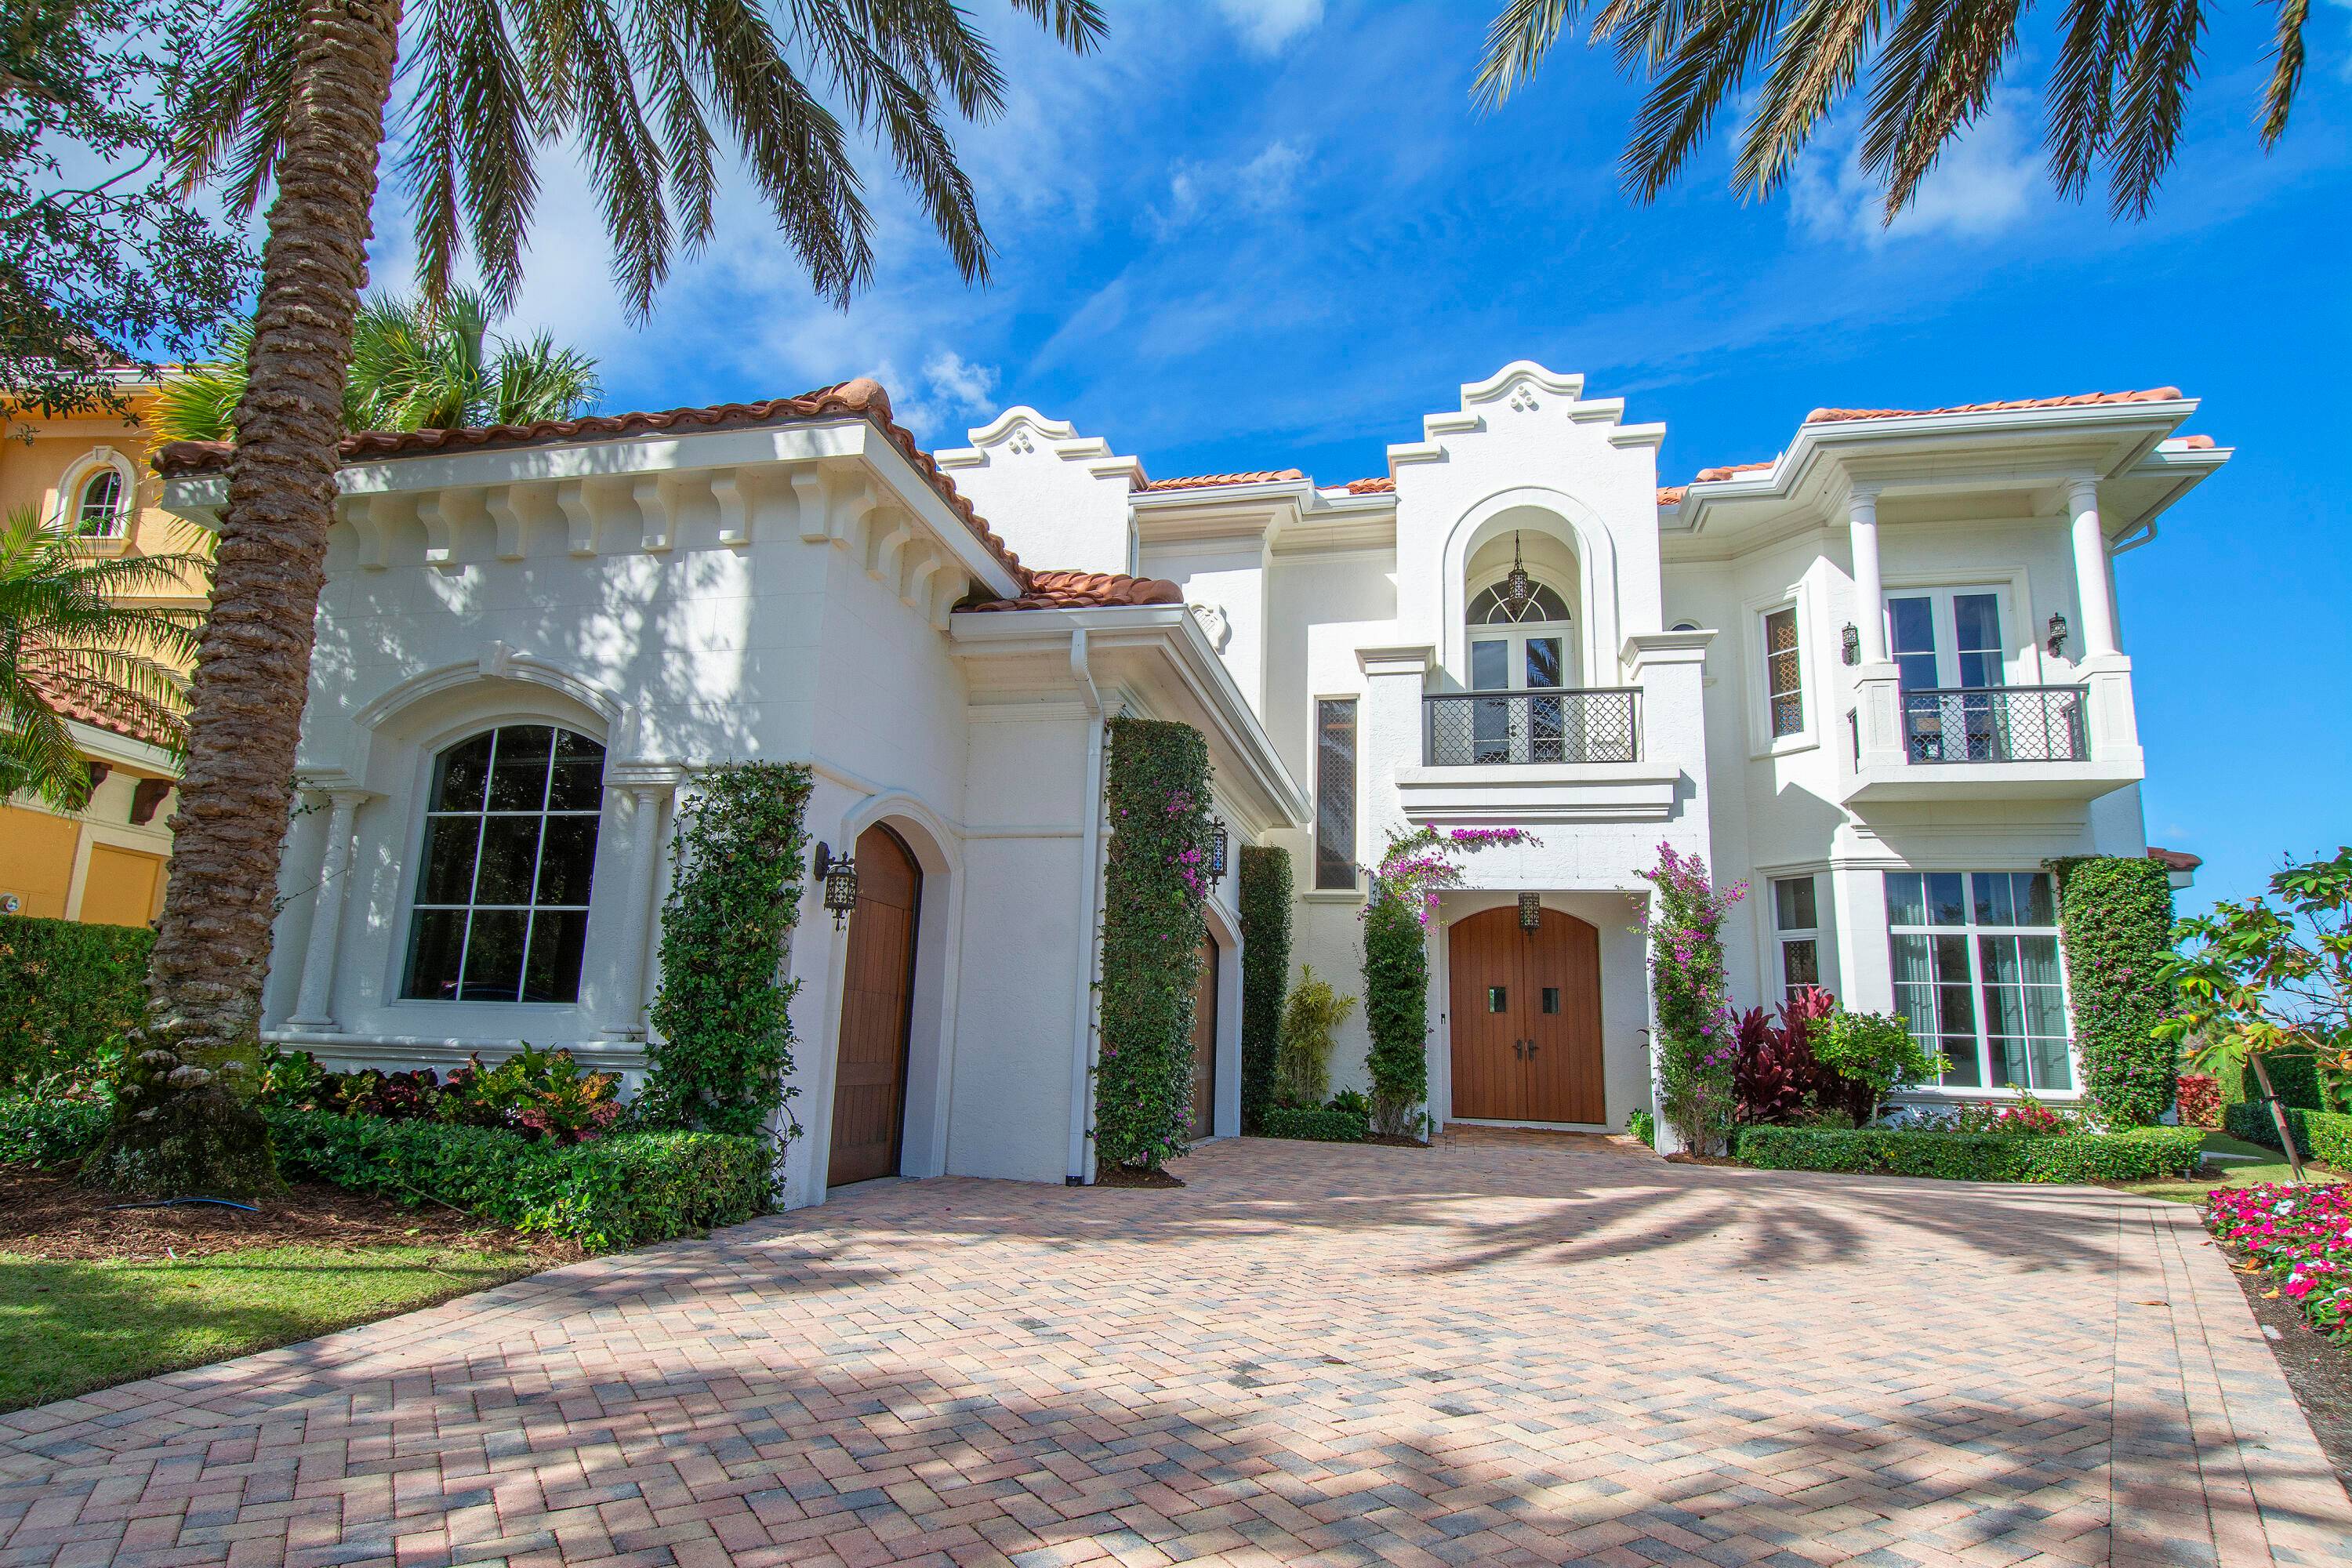 This stunning residence, nestled on a quiet cul de sac in Tesoro, emanates elegance.